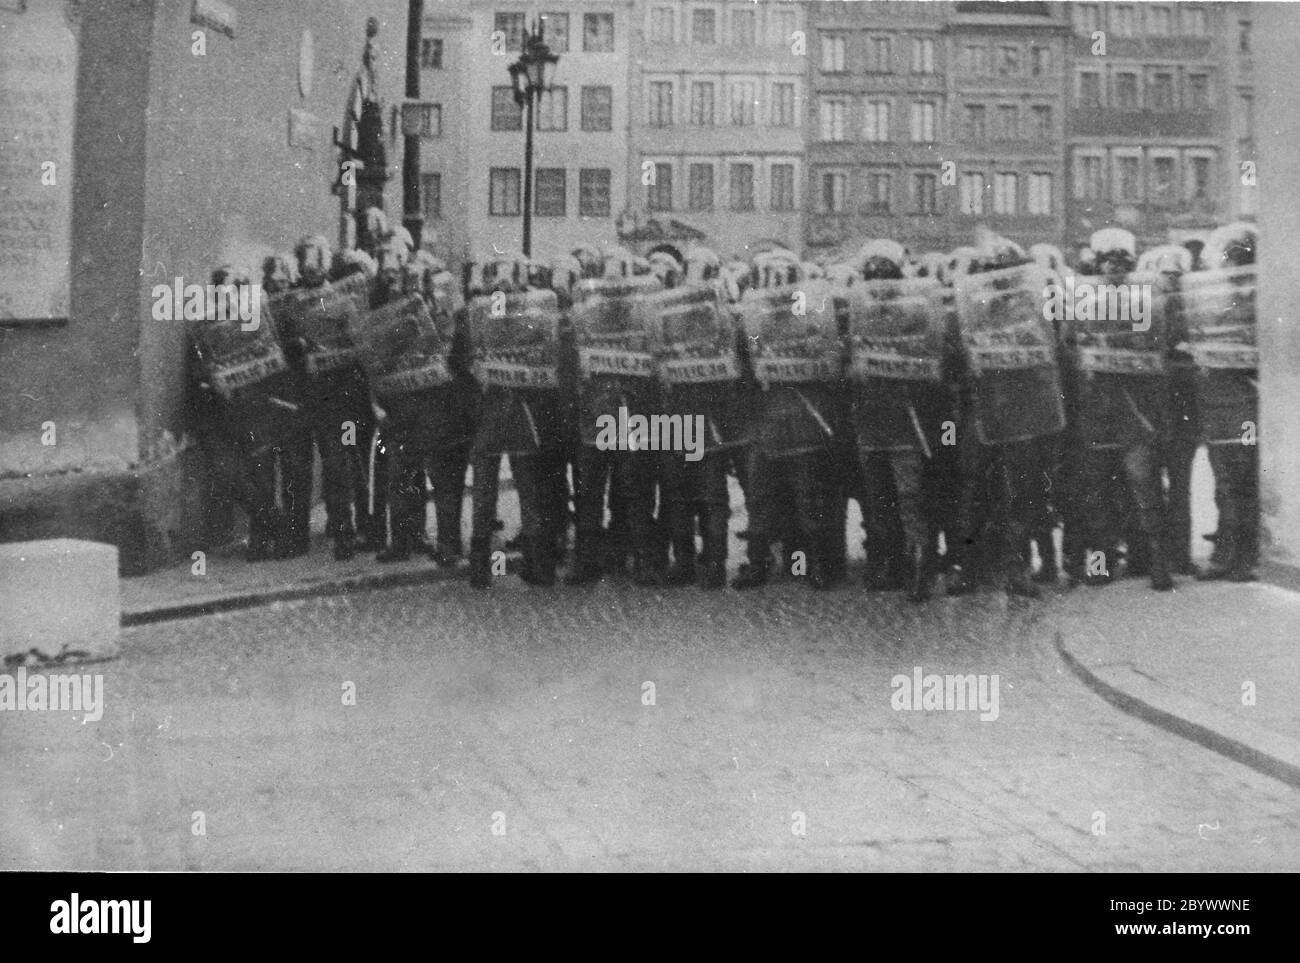 Police action in Poland during the martial law of 1981-1983 Stock Photo -  Alamy